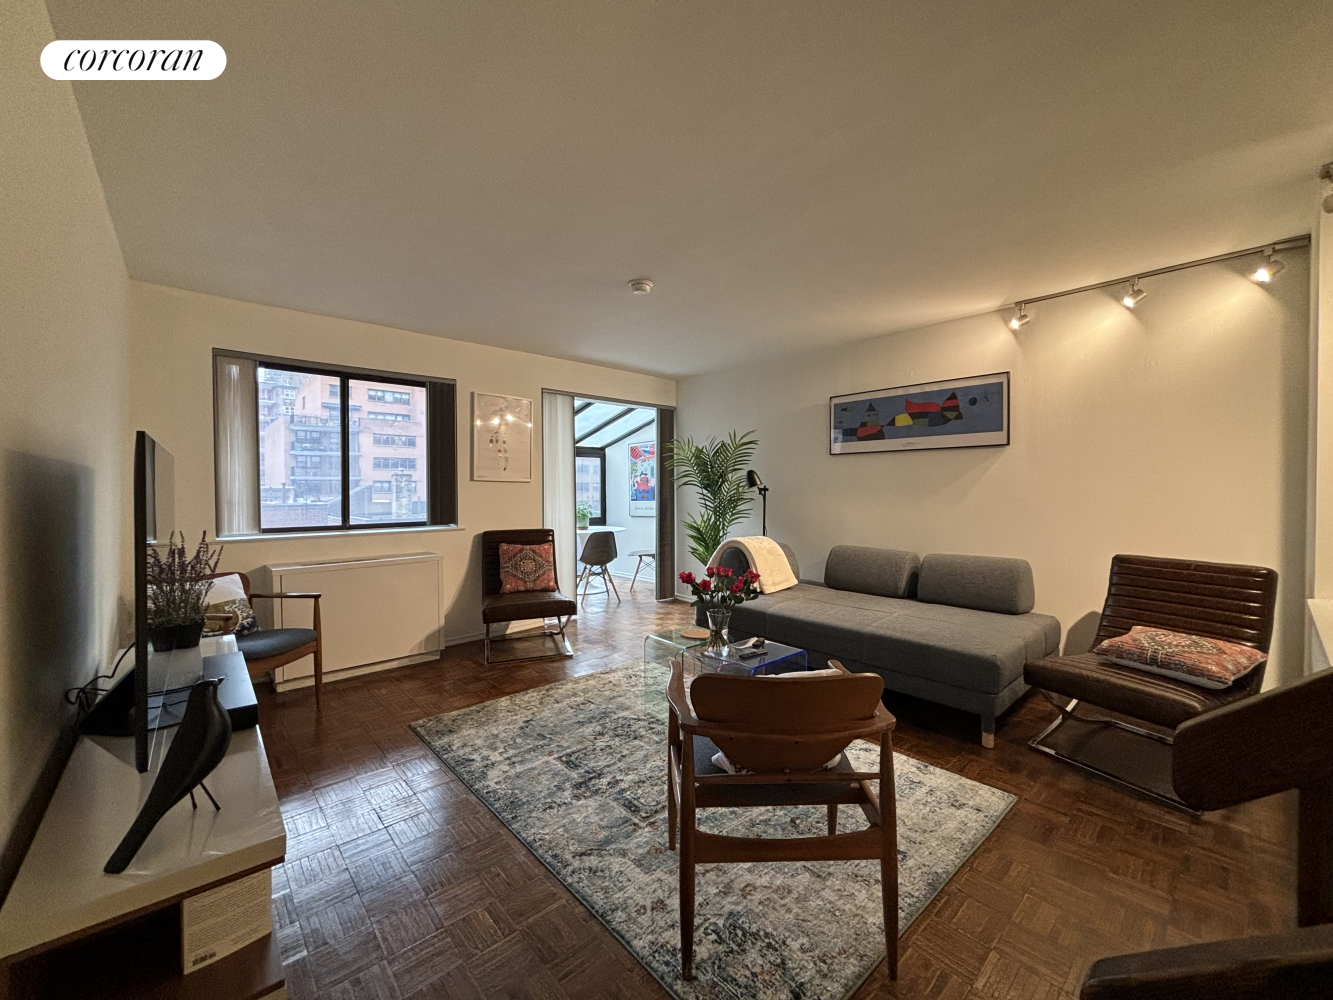 225 East 86th Street 602, Yorkville, Upper East Side, NYC - 1 Bedrooms  
1 Bathrooms  
4 Rooms - 